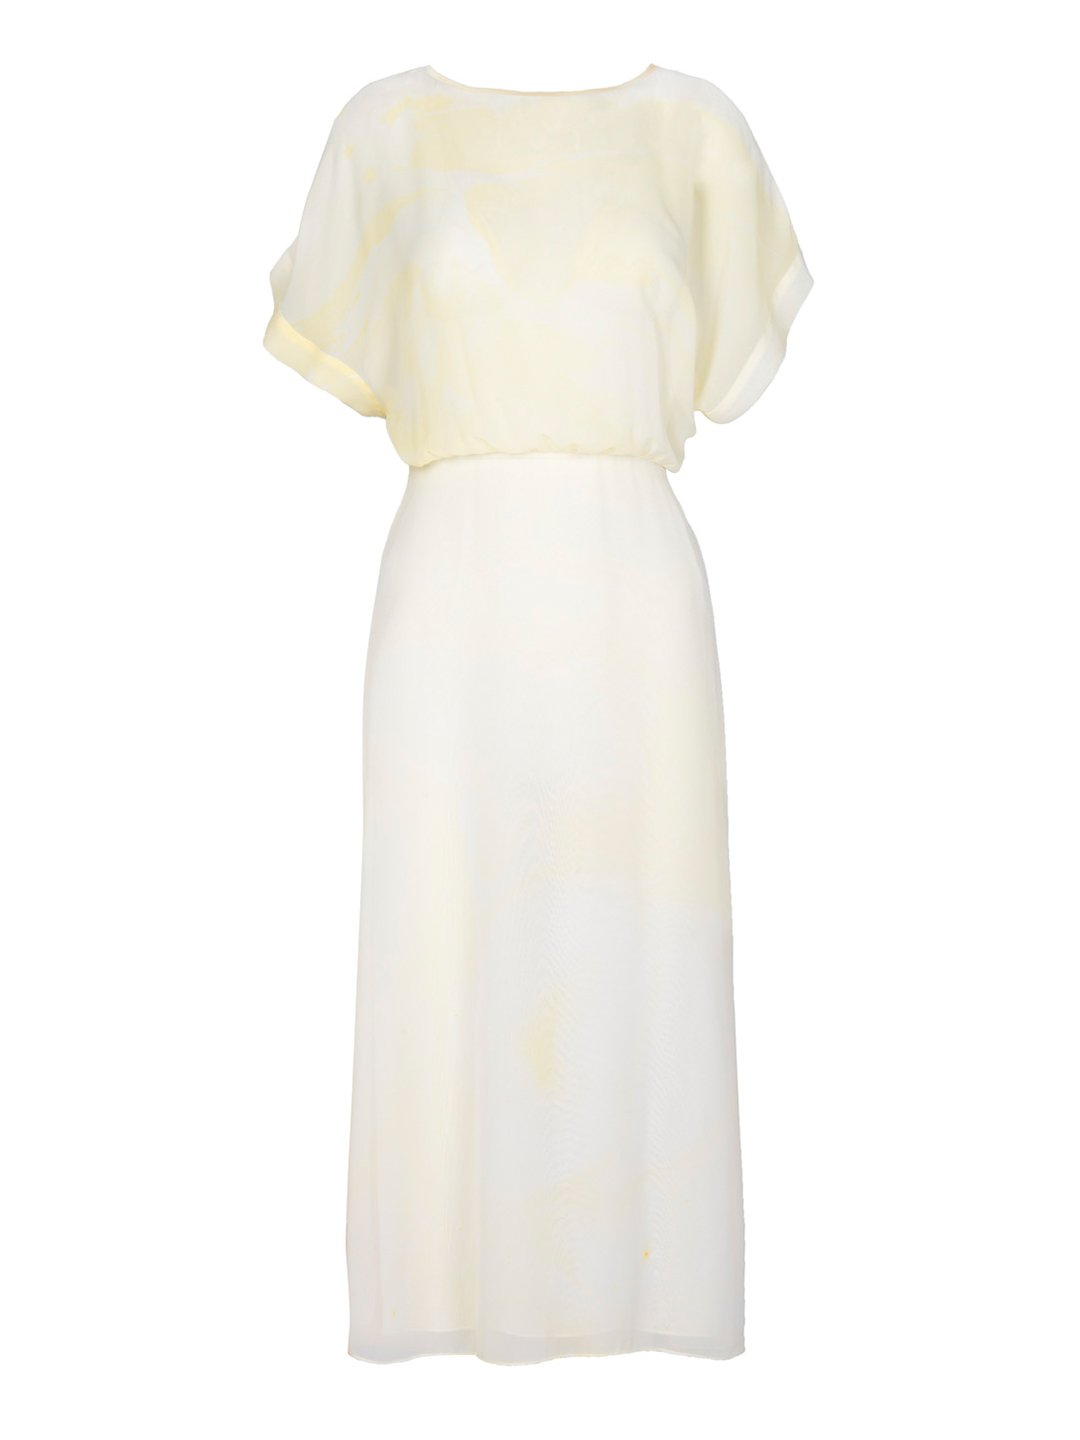 Edward Mongzar Silk Hand Marbled Misty Dress in Yellow